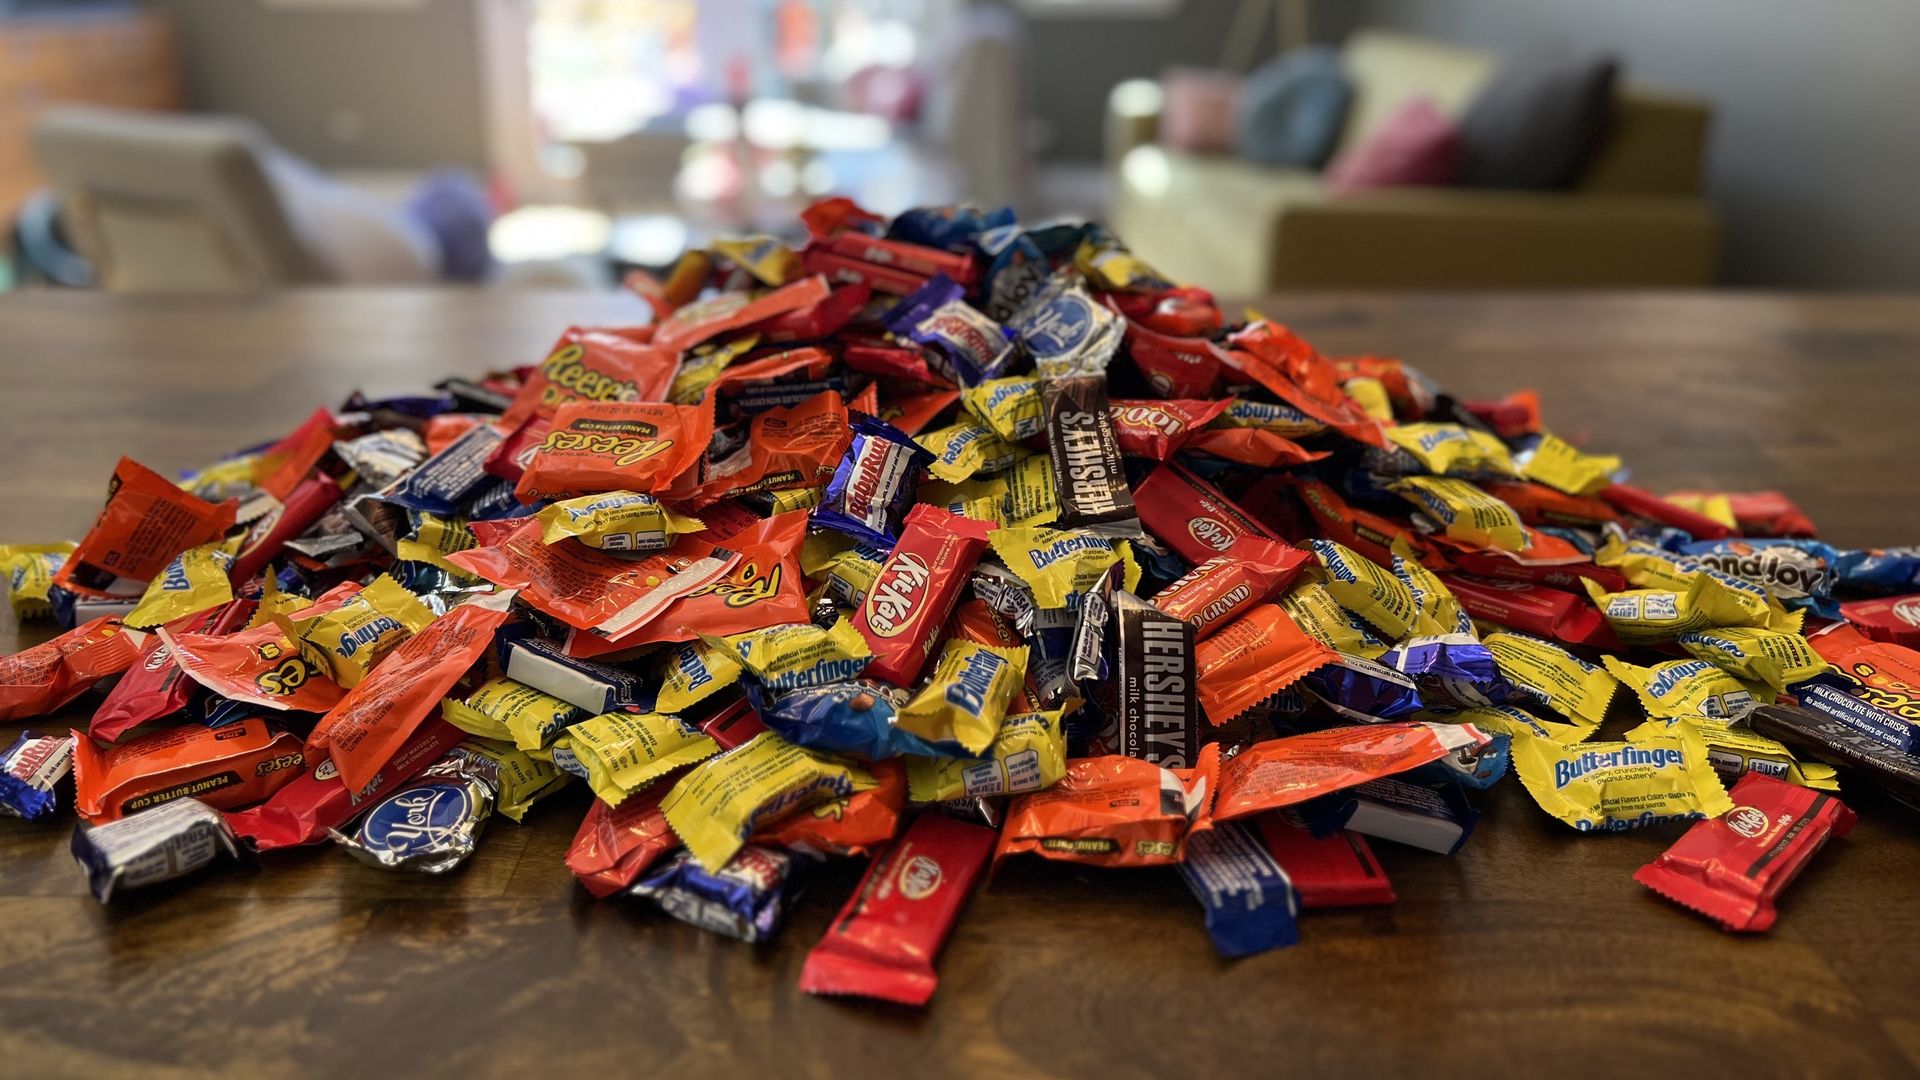 Chicago's favorite Halloween candy - Axios Chicago